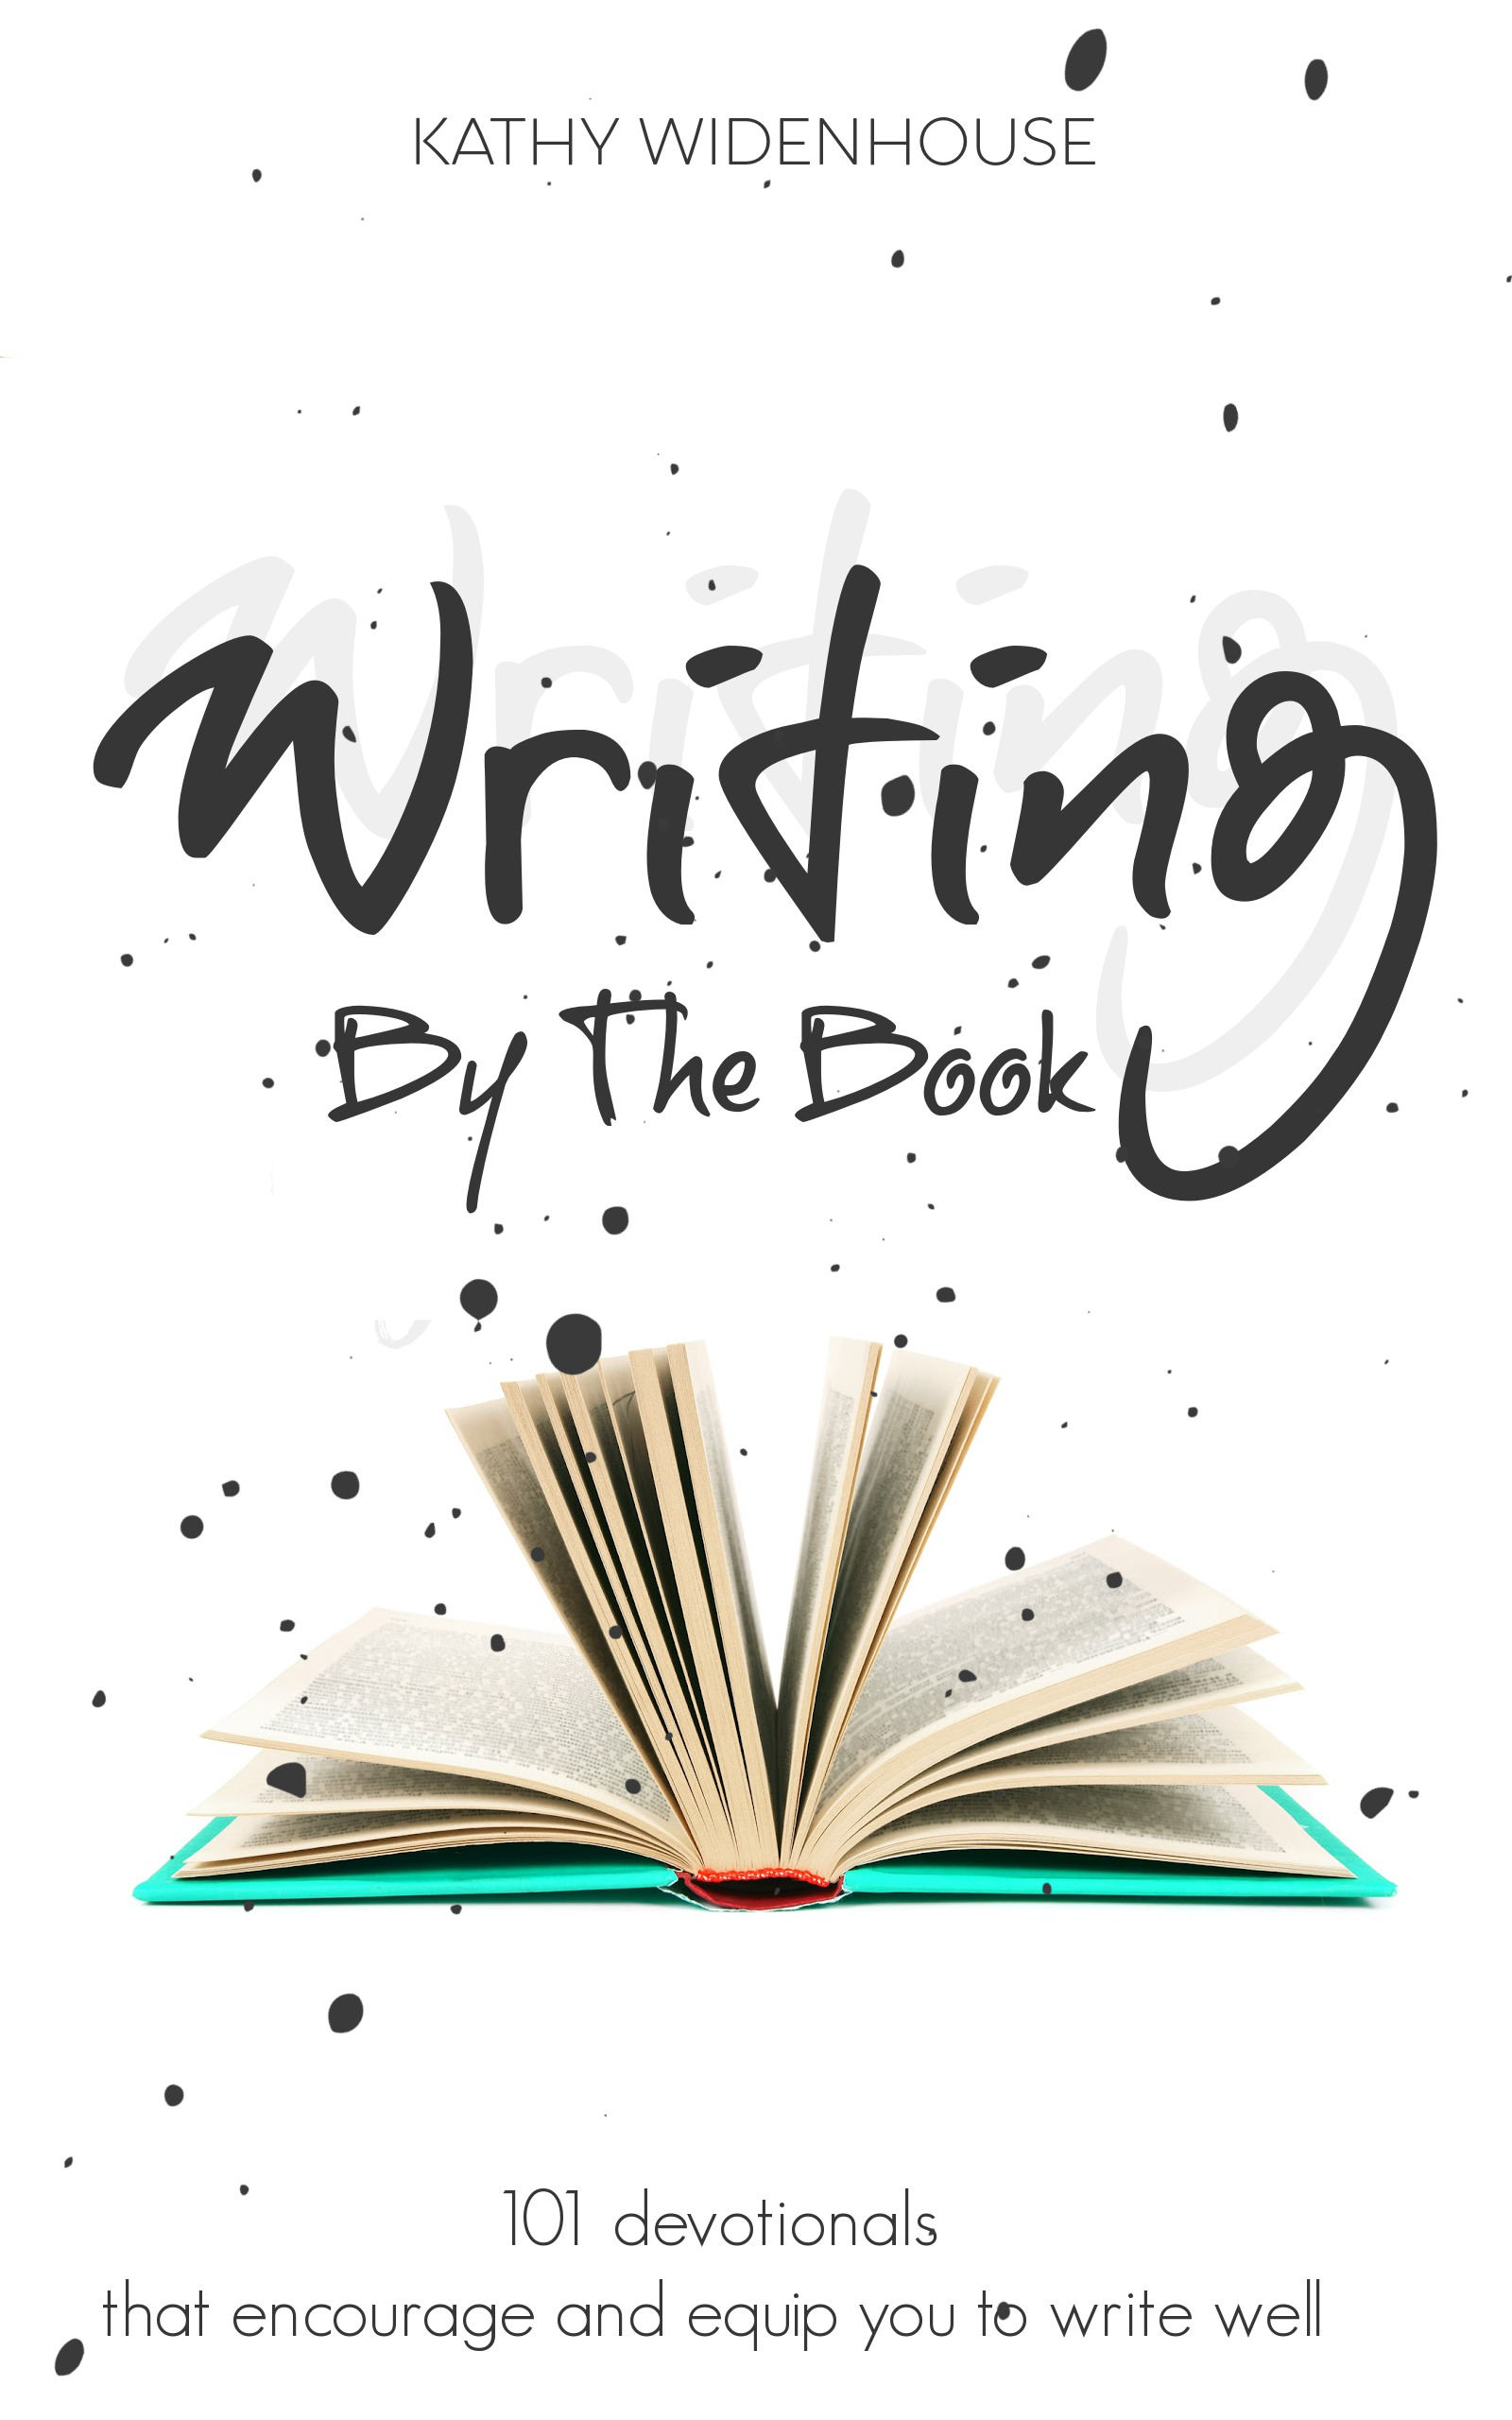 Writing By The Book: 101 #devotionals for writers by Kathy Widenhouse with Word Wise at Nonprofit Copywriter #ChristianWriting